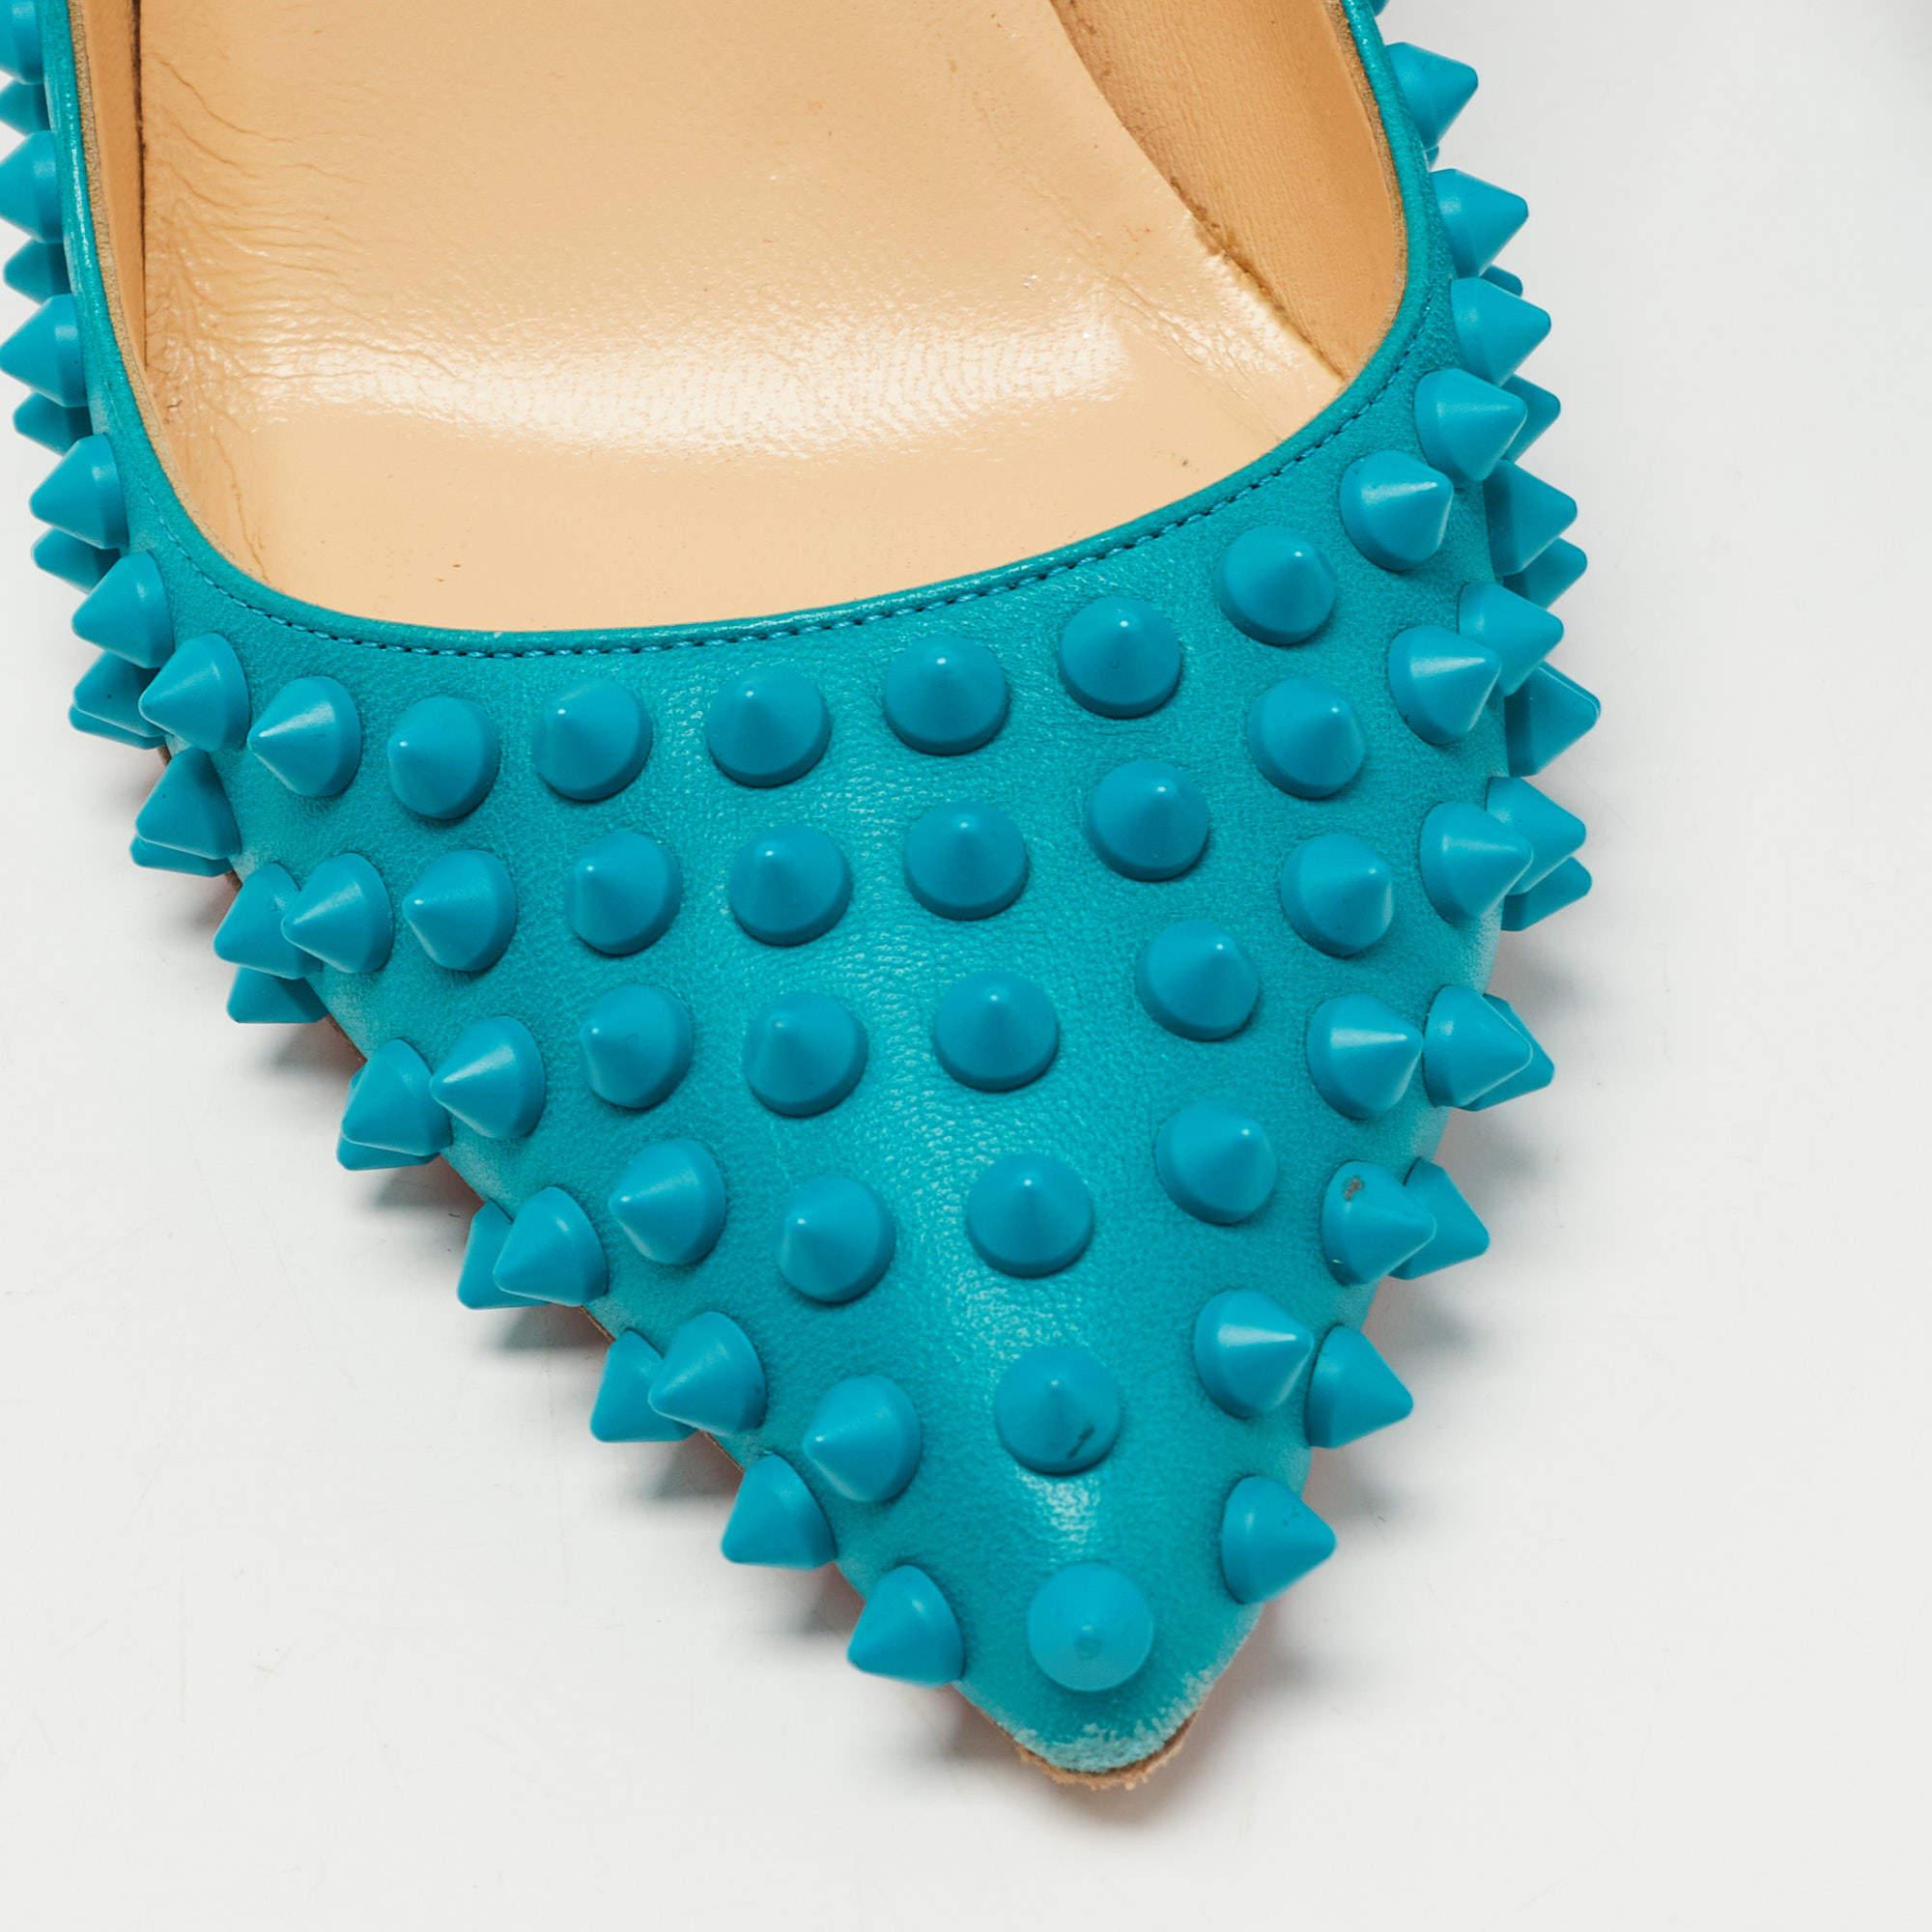 Christian Louboutin Blue Leather Pigalle Spikes Pumps Size 37.5 2